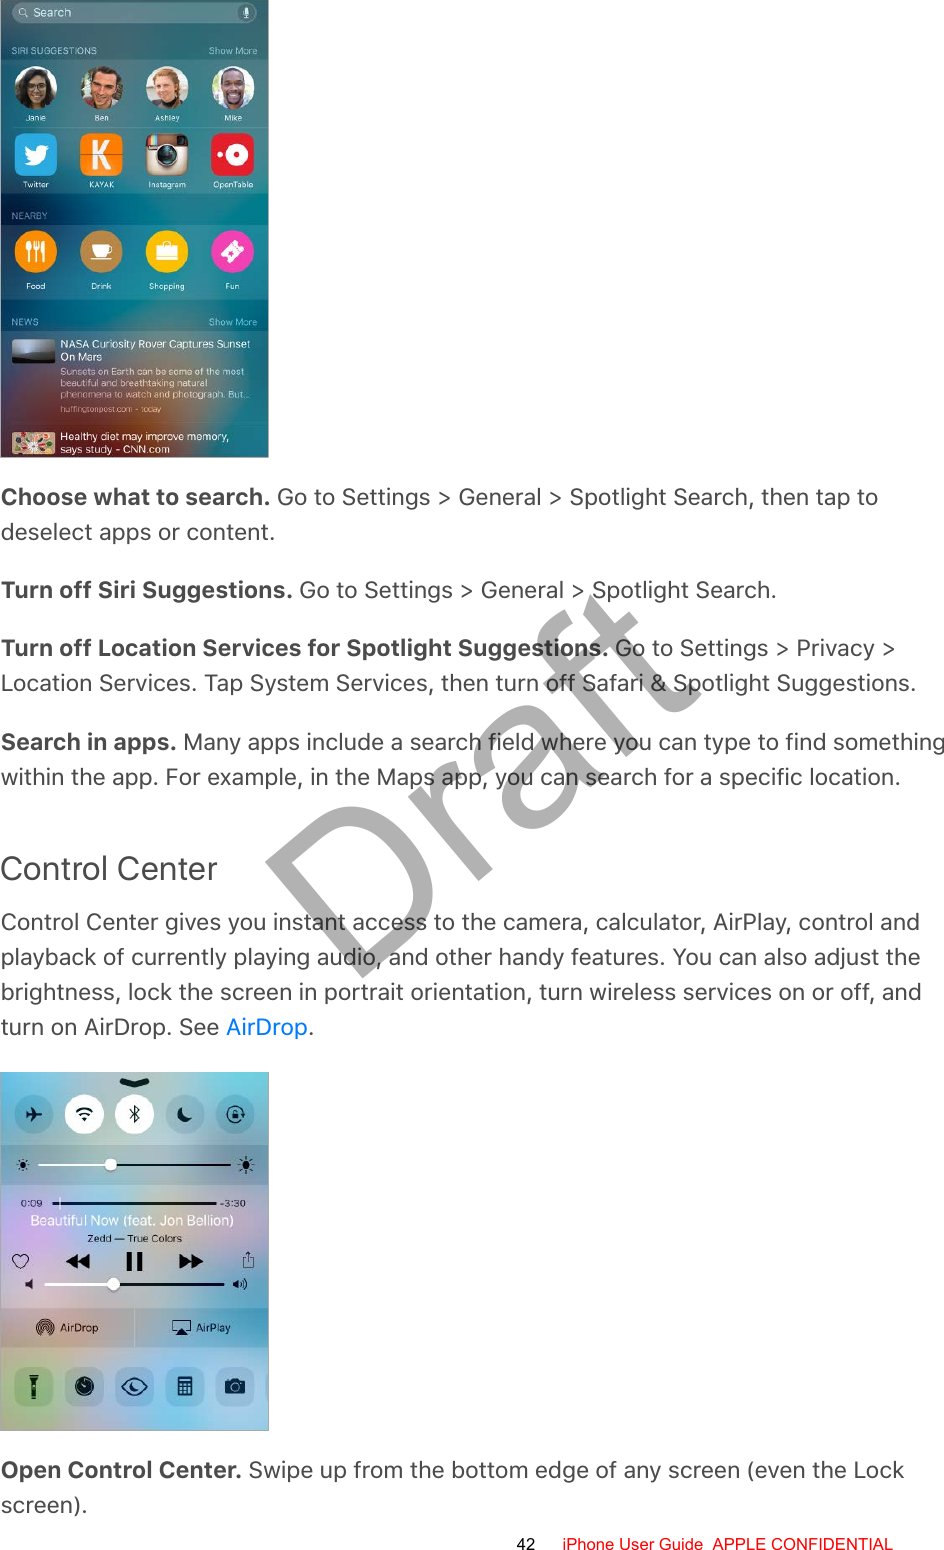 Choose what to search. Go to Settings &gt; General &gt; Spotlight Search, then tap todeselect apps or content.Turn off Siri Suggestions. Go to Settings &gt; General &gt; Spotlight Search.Turn off Location Services for Spotlight Suggestions. Go to Settings &gt; Privacy &gt;Location Services. Tap System Services, then turn off Safari &amp; Spotlight Suggestions.Search in apps. Many apps include a search field where you can type to find somethingwithin the app. For example, in the Maps app, you can search for a specific location.Control CenterControl Center gives you instant access to the camera, calculator, AirPlay, control andplayback of currently playing audio, and other handy features. You can also adjust thebrightness, lock the screen in portrait orientation, turn wireless services on or off, andturn on AirDrop. See  .Open Control Center. Swipe up from the bottom edge of any screen (even the Lockscreen).AirDrop42 iPhone User Guide  APPLE CONFIDENTIALDraft